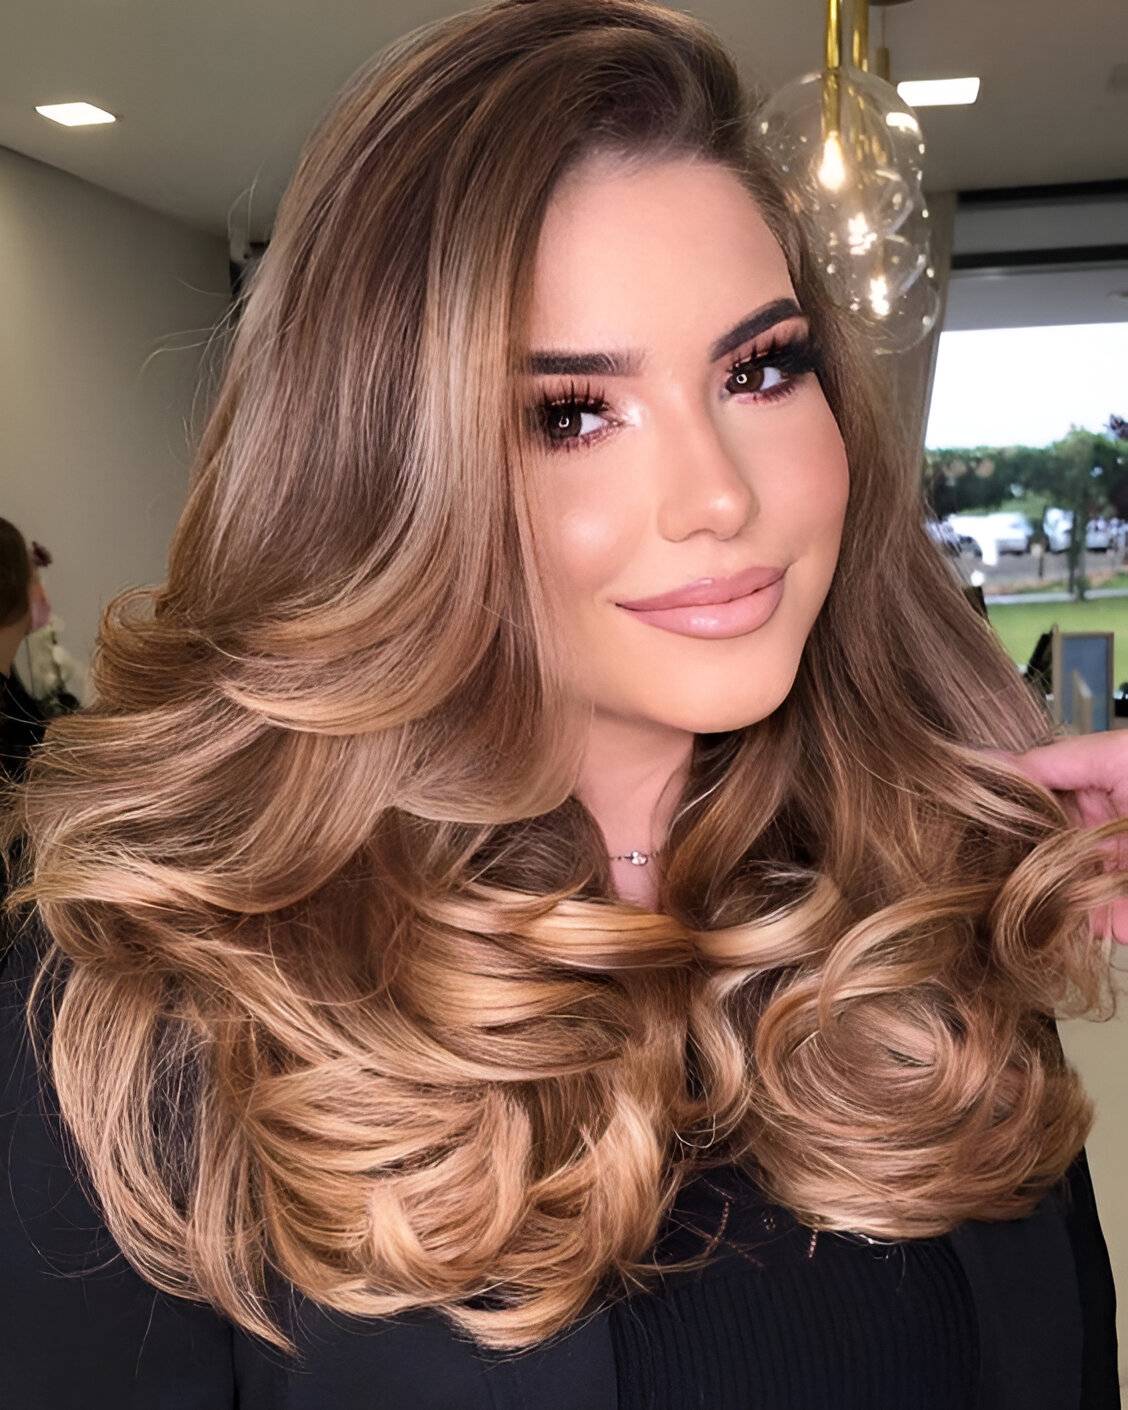 27 Gorgeous Golden Brown Hair Ideas To Make You Stunning Like A Model 17